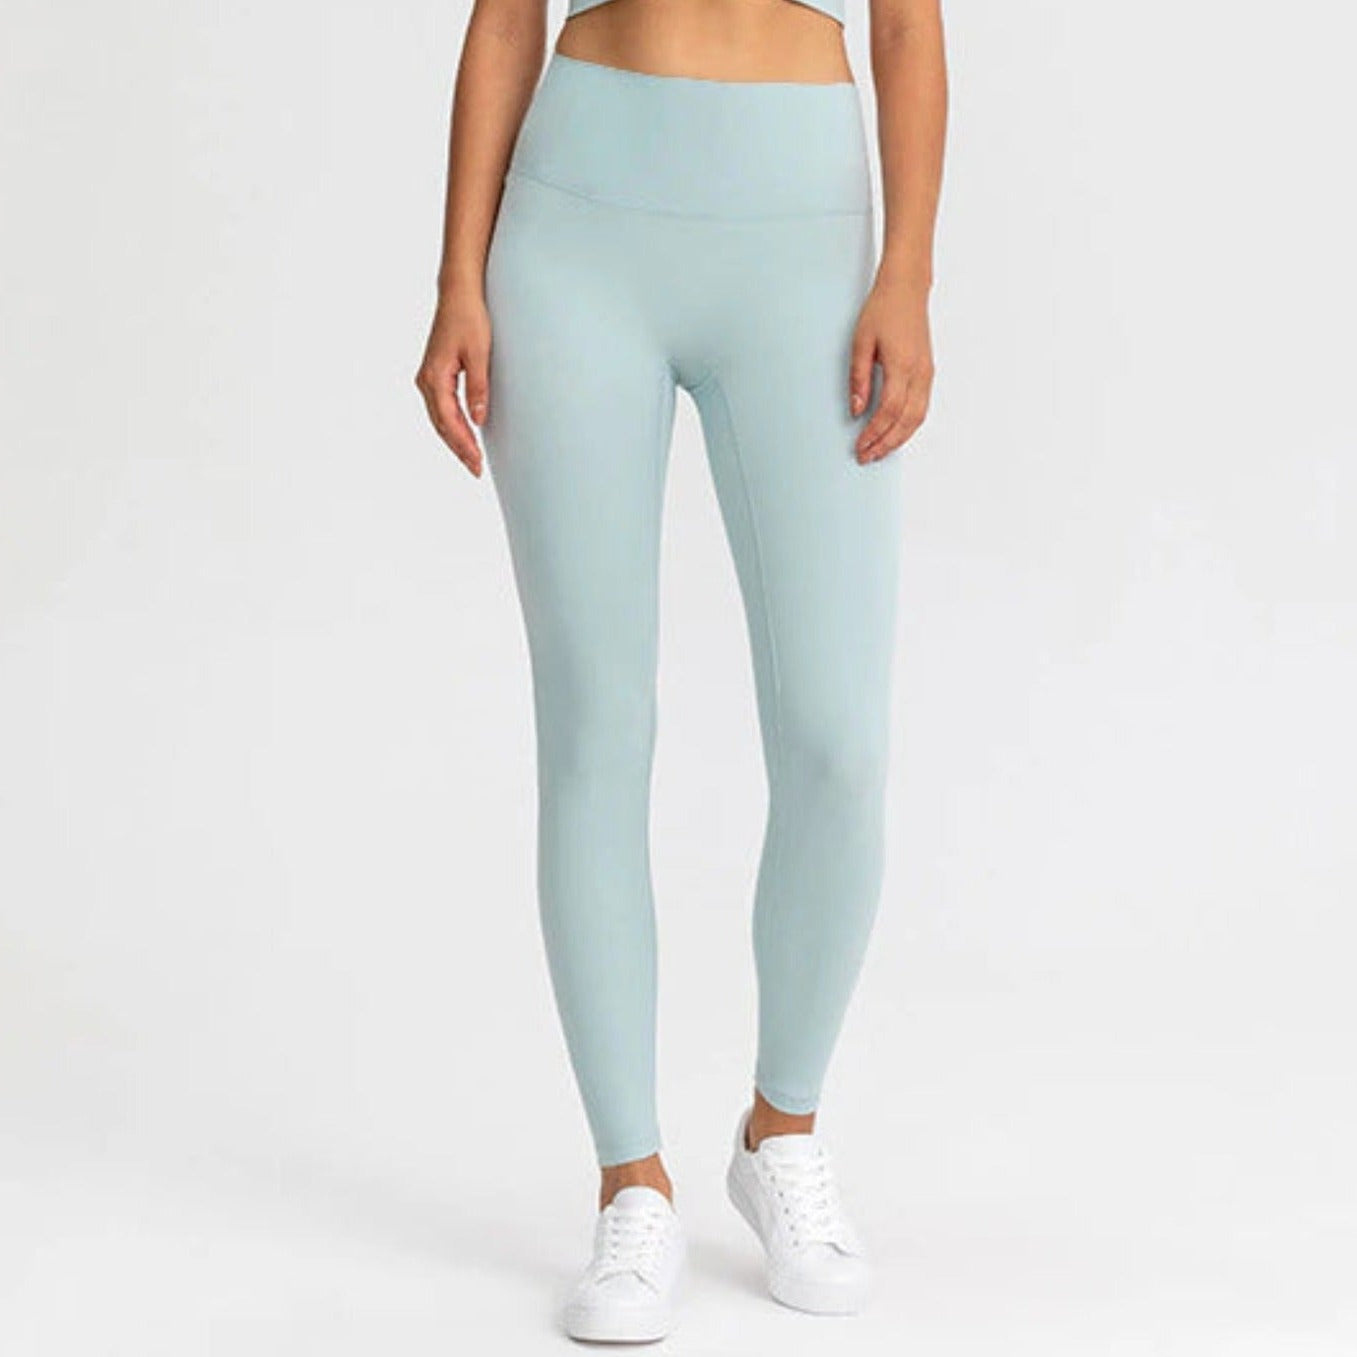 FITNESS MODEL WEARING A MINTY, SQUAT PROOF, AND HIGH WAIST LEGGINGS FROM VIBRAS ACTIVEWEAR.